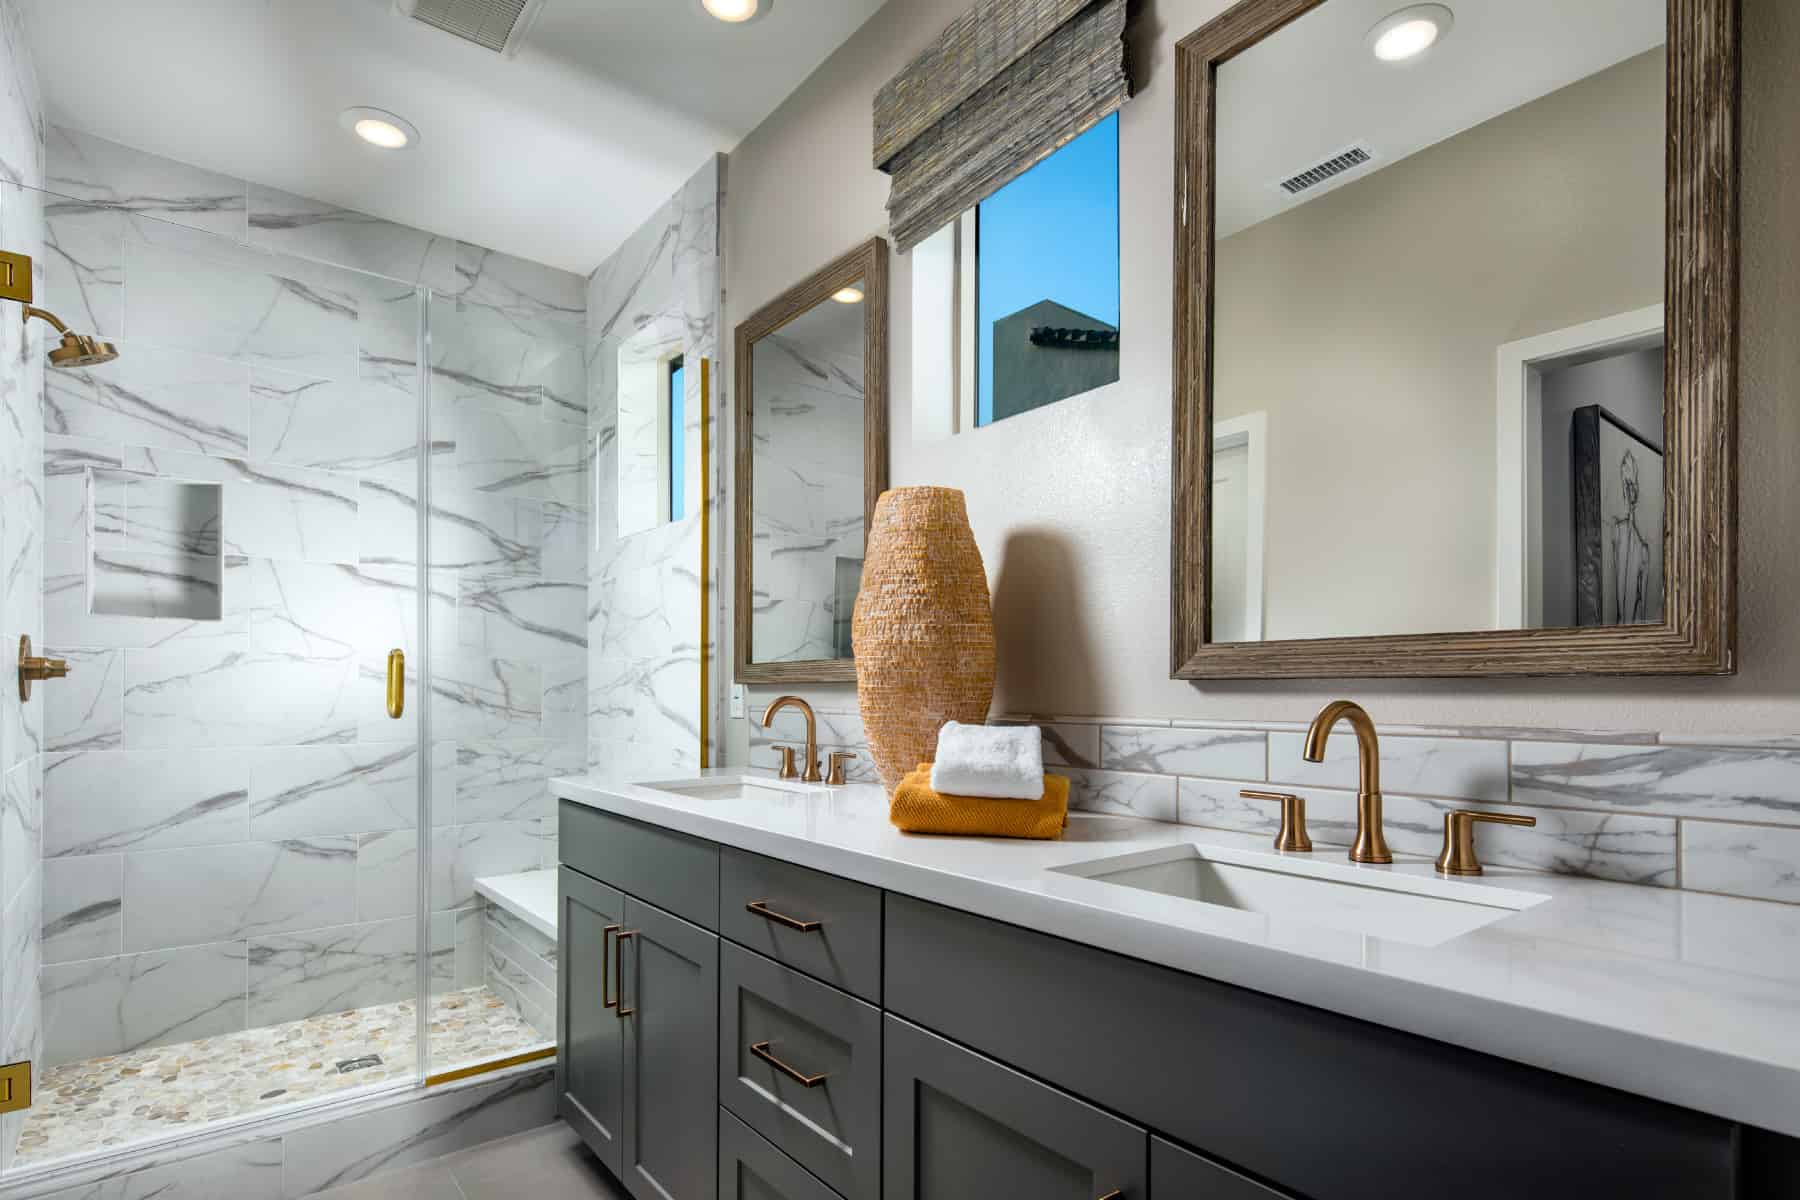 Primary Bath at Plan 4 of Belmont by Melia Homes in Cypress, CA